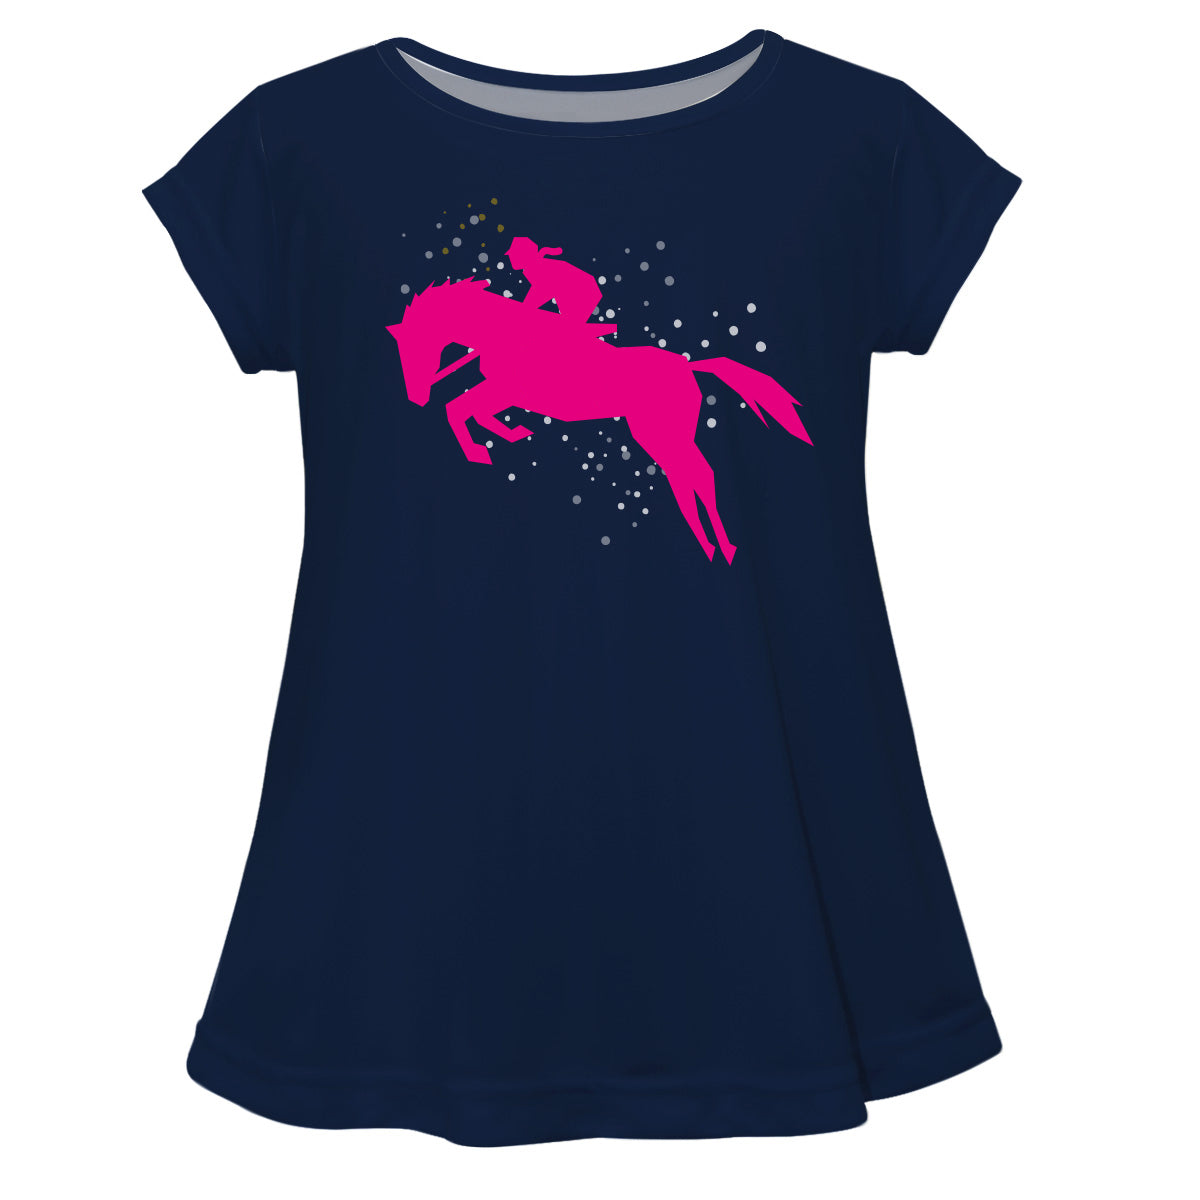 Navy short sleeve blouse and hot pink equestrian with monogram - Wimziy&Co.